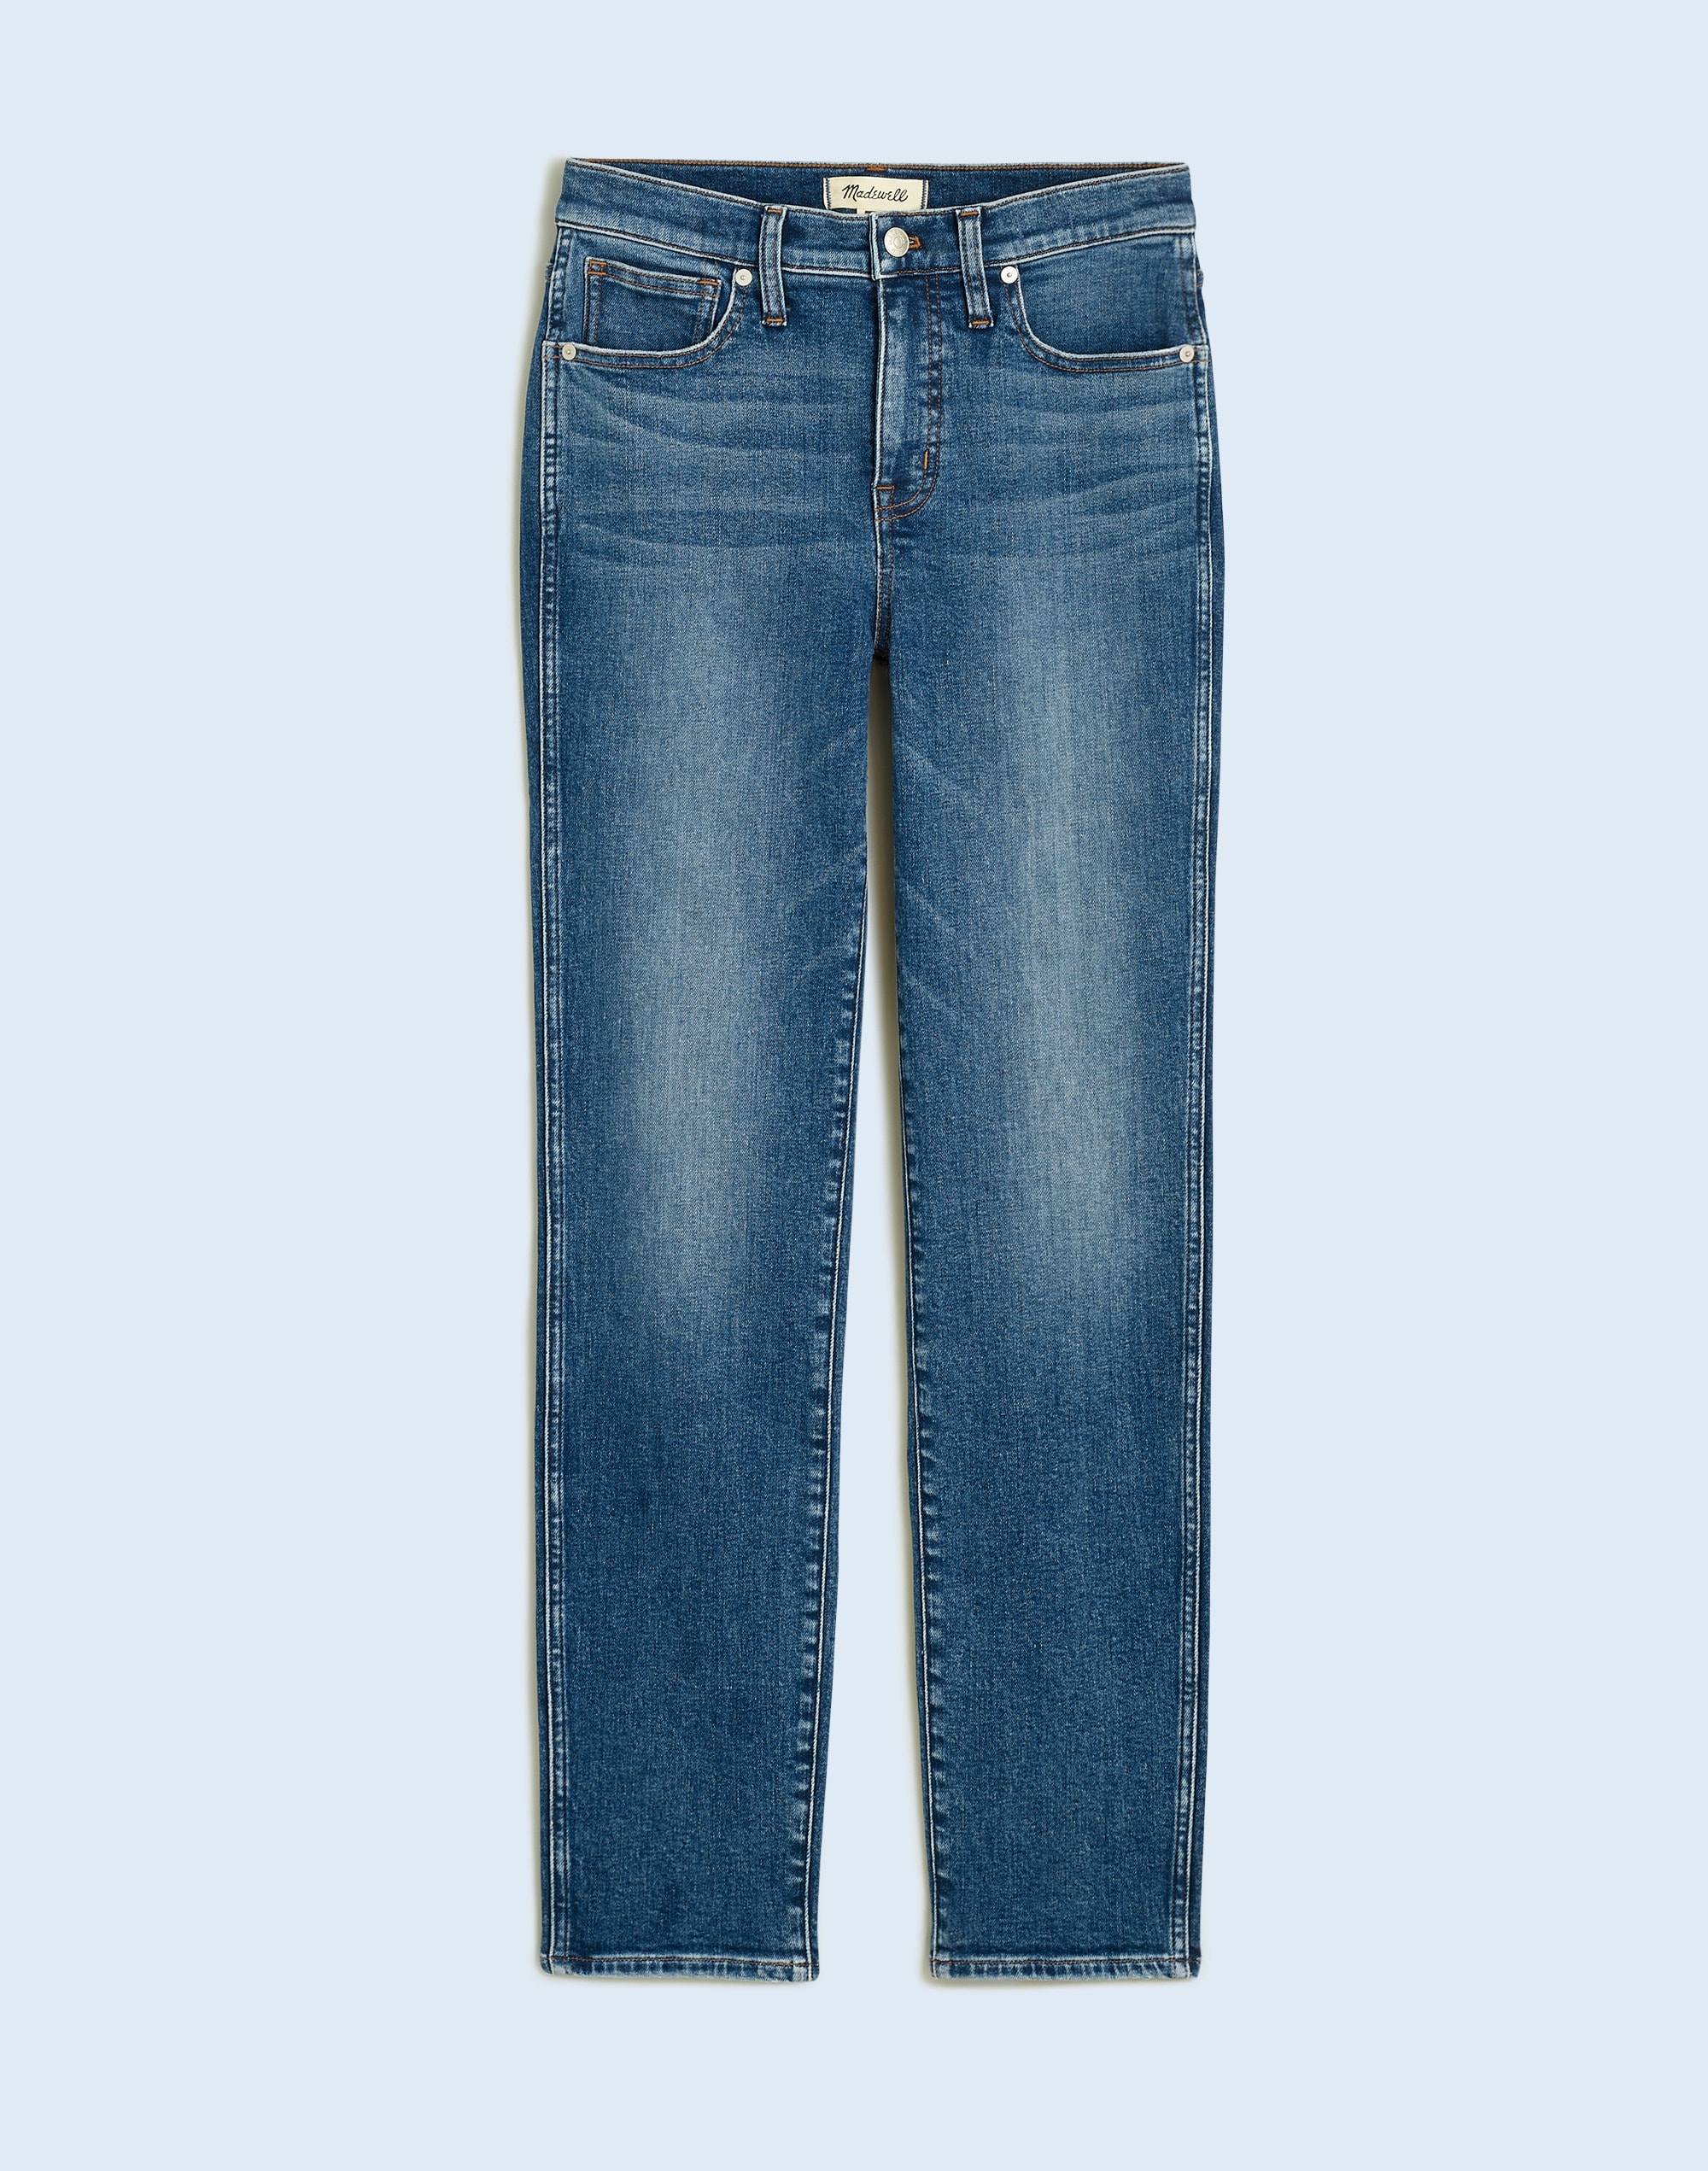 Stovepipe Jeans Drifthaven Wash